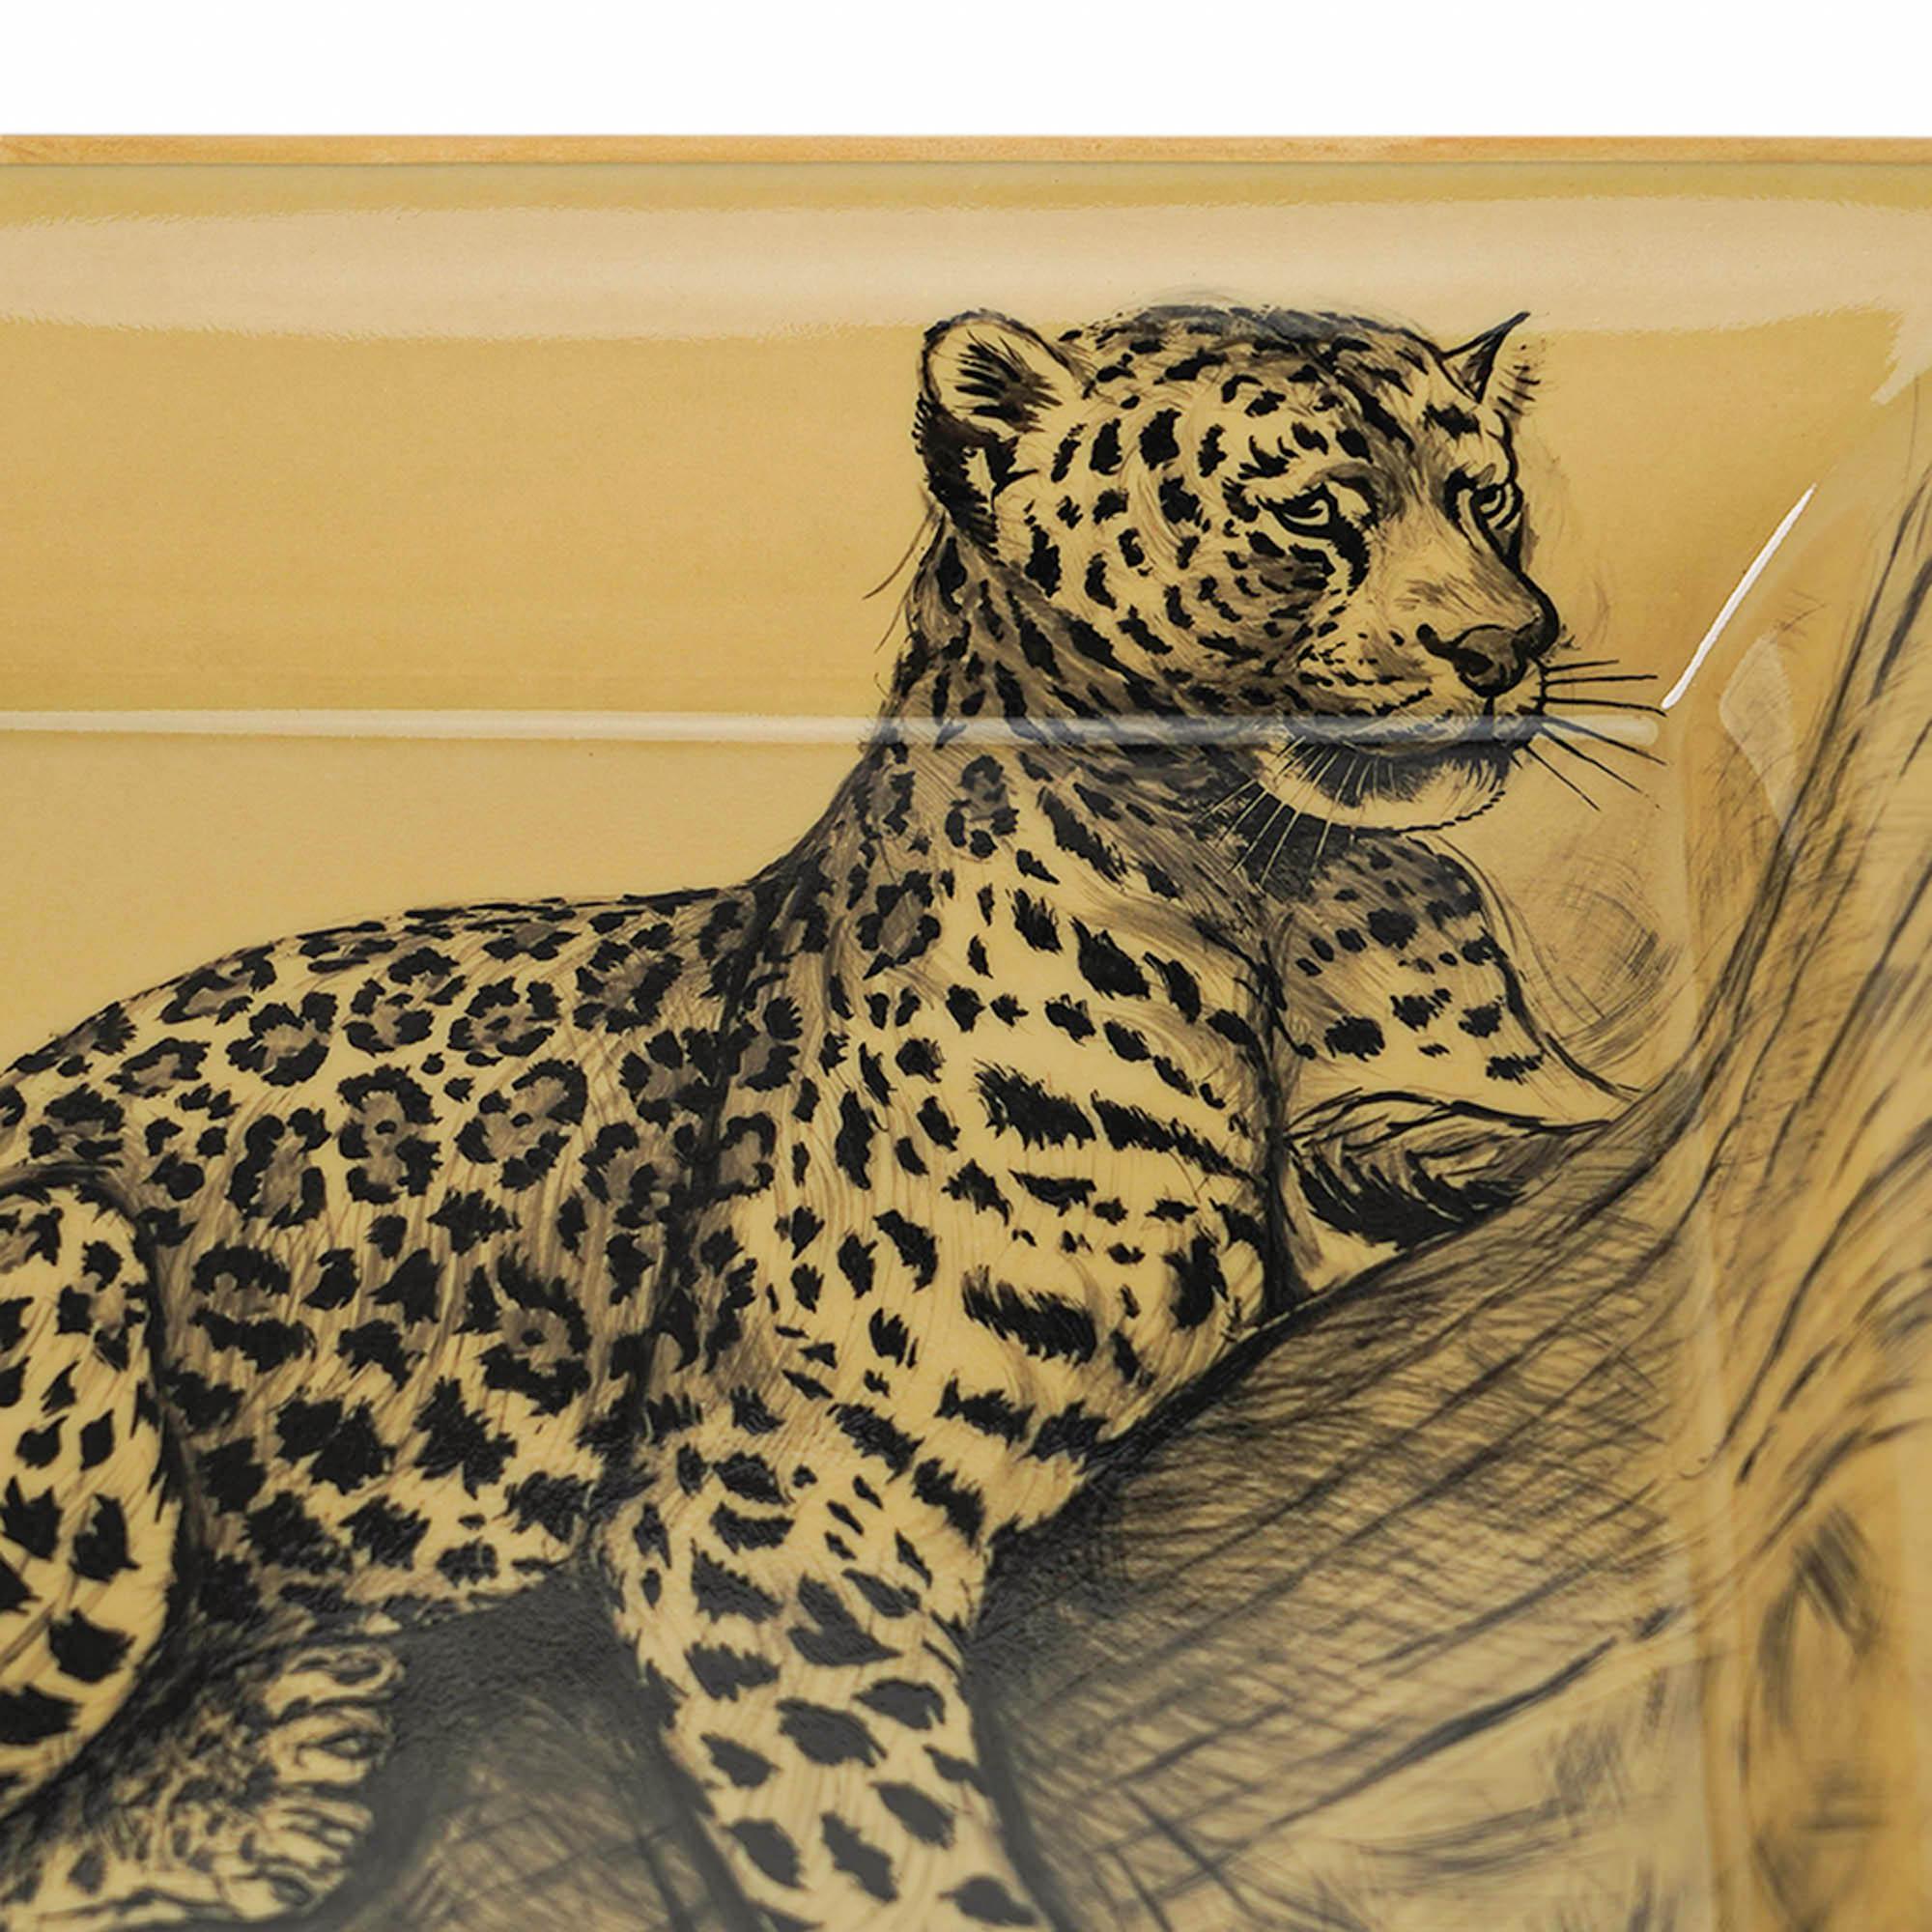 Mightychic offers an Hermes Le Felin hand painted porcelain Change Tray in Naturel.
Hand painted gold trim.
Designed by Robert Dallet, a wildlife artist for the Museum of Naturel History in Paris.
Renowned for his remarkable ability to capture the